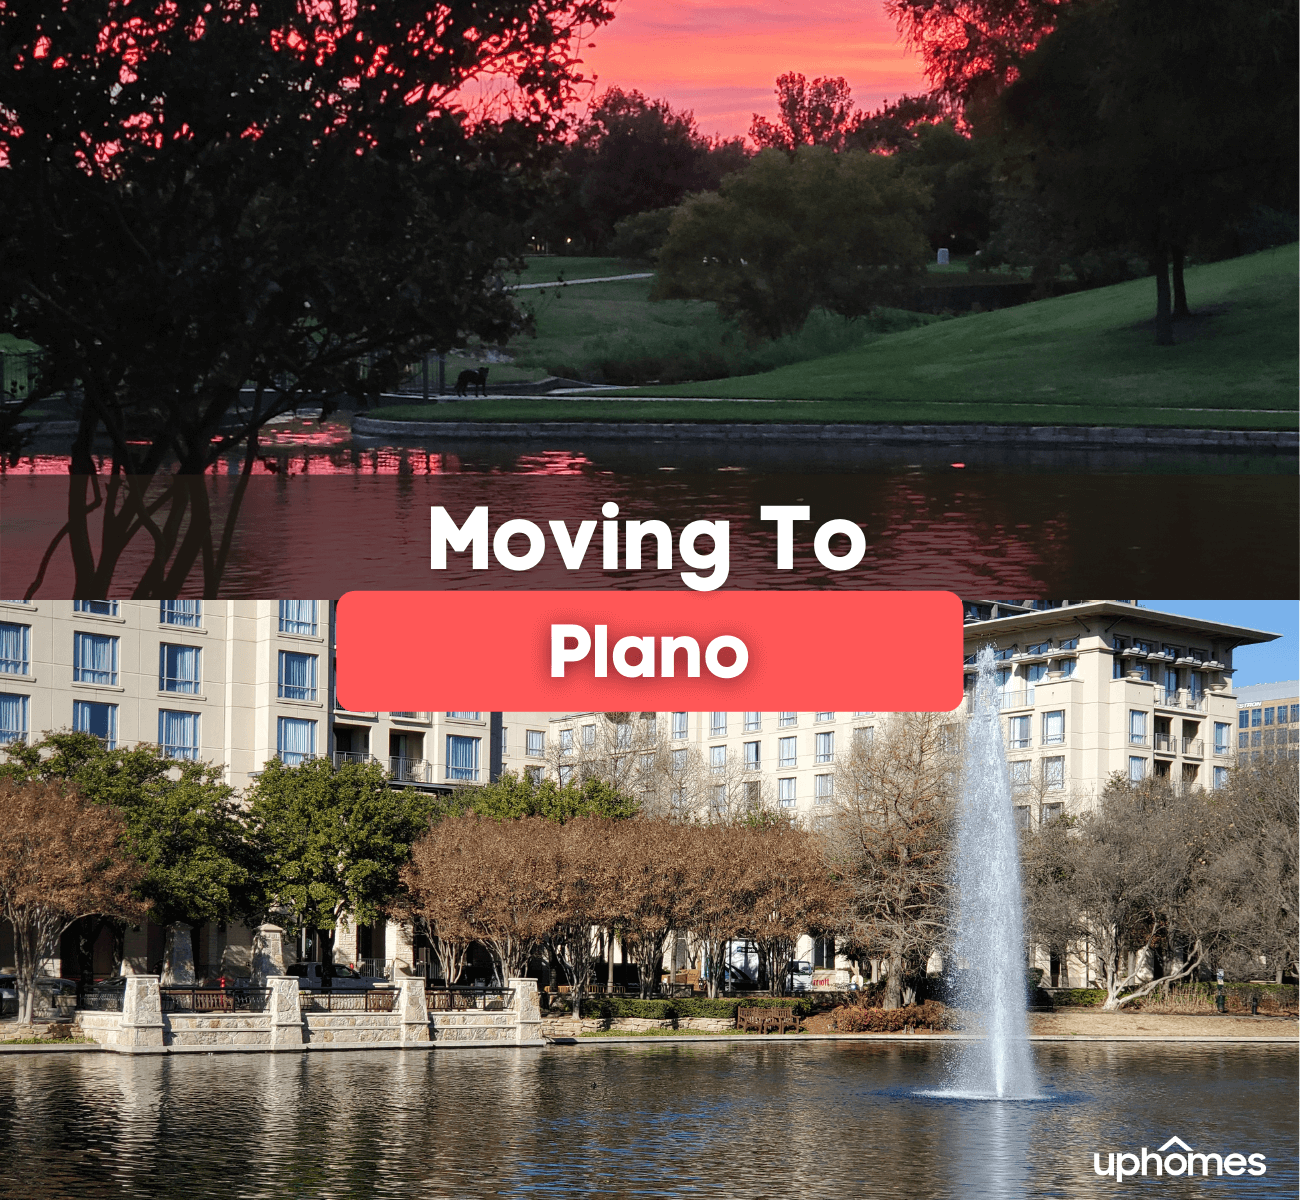 Moving to Plano Texas - What is it like living in Plano TX?